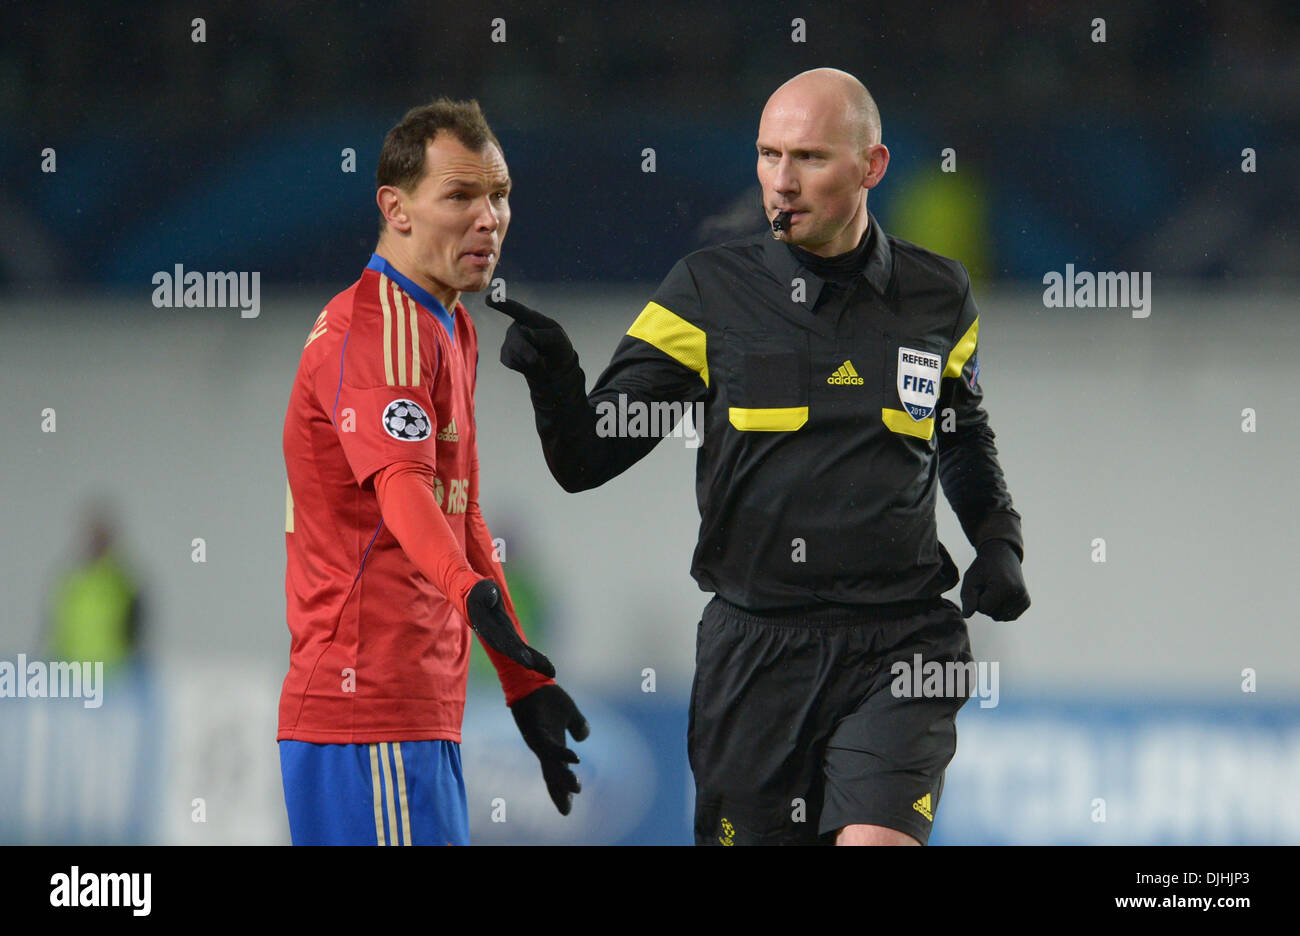 Moscow, Russia. 27th Nov, 2013. Referee Antony Gautier (L) talks to Moscow's Sergei Ignashevich during the UEFA Champions League Group D soccer match between CSKA Moscow and FC Bayern Munich at Arena Chimki in Moscow, Russia, 27 November 2013. Photo: Andreas Gebert/dpa/Alamy Live News Stock Photo